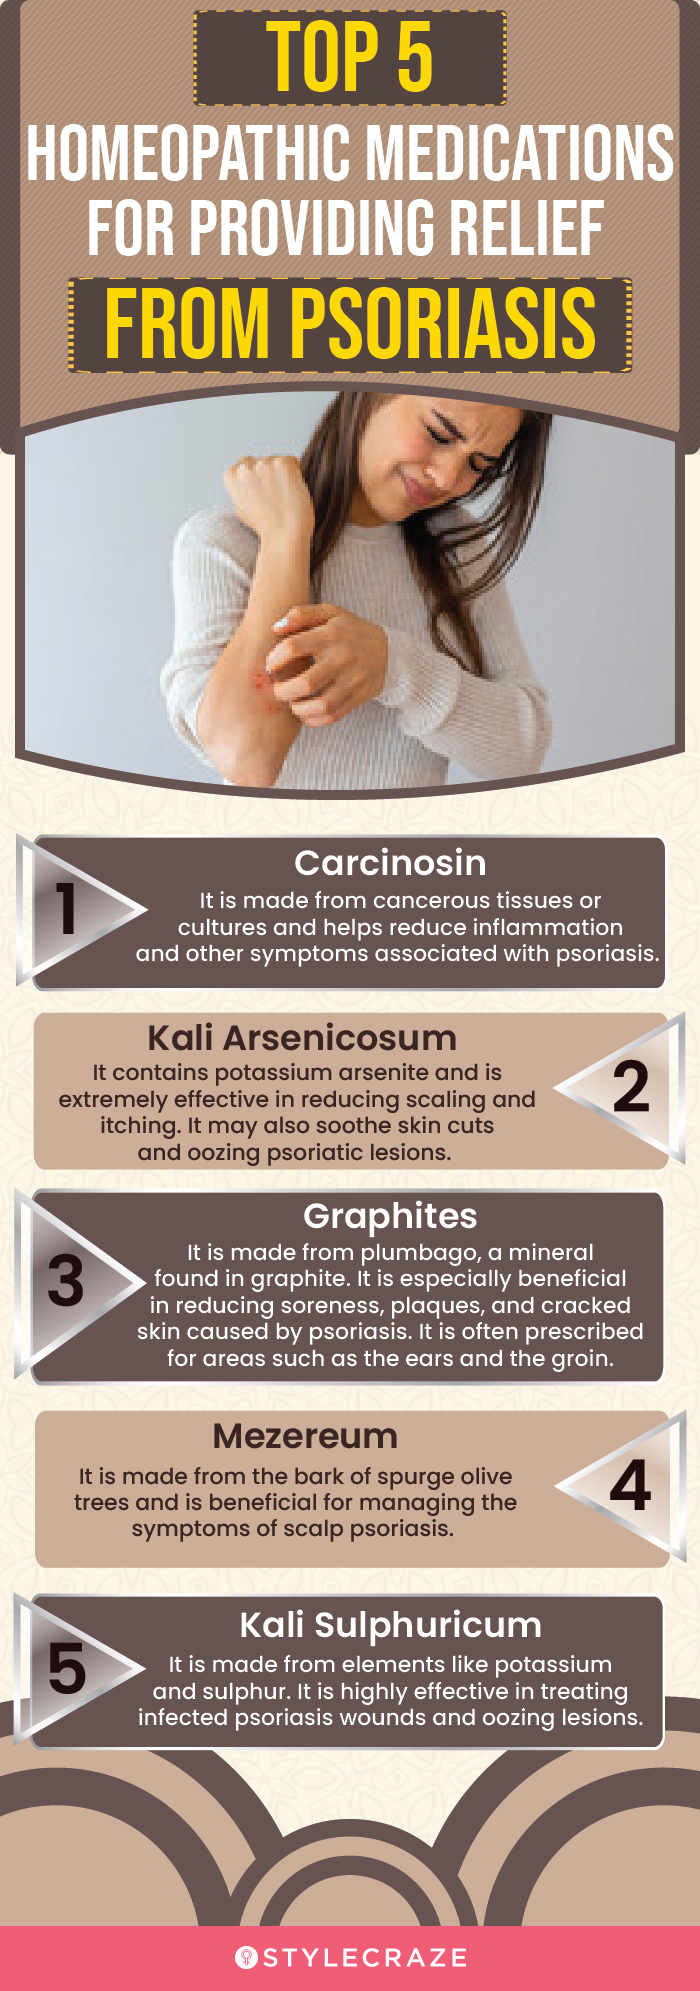 top 5 homeopathic medications for providing relief from psoriasis (infographic)